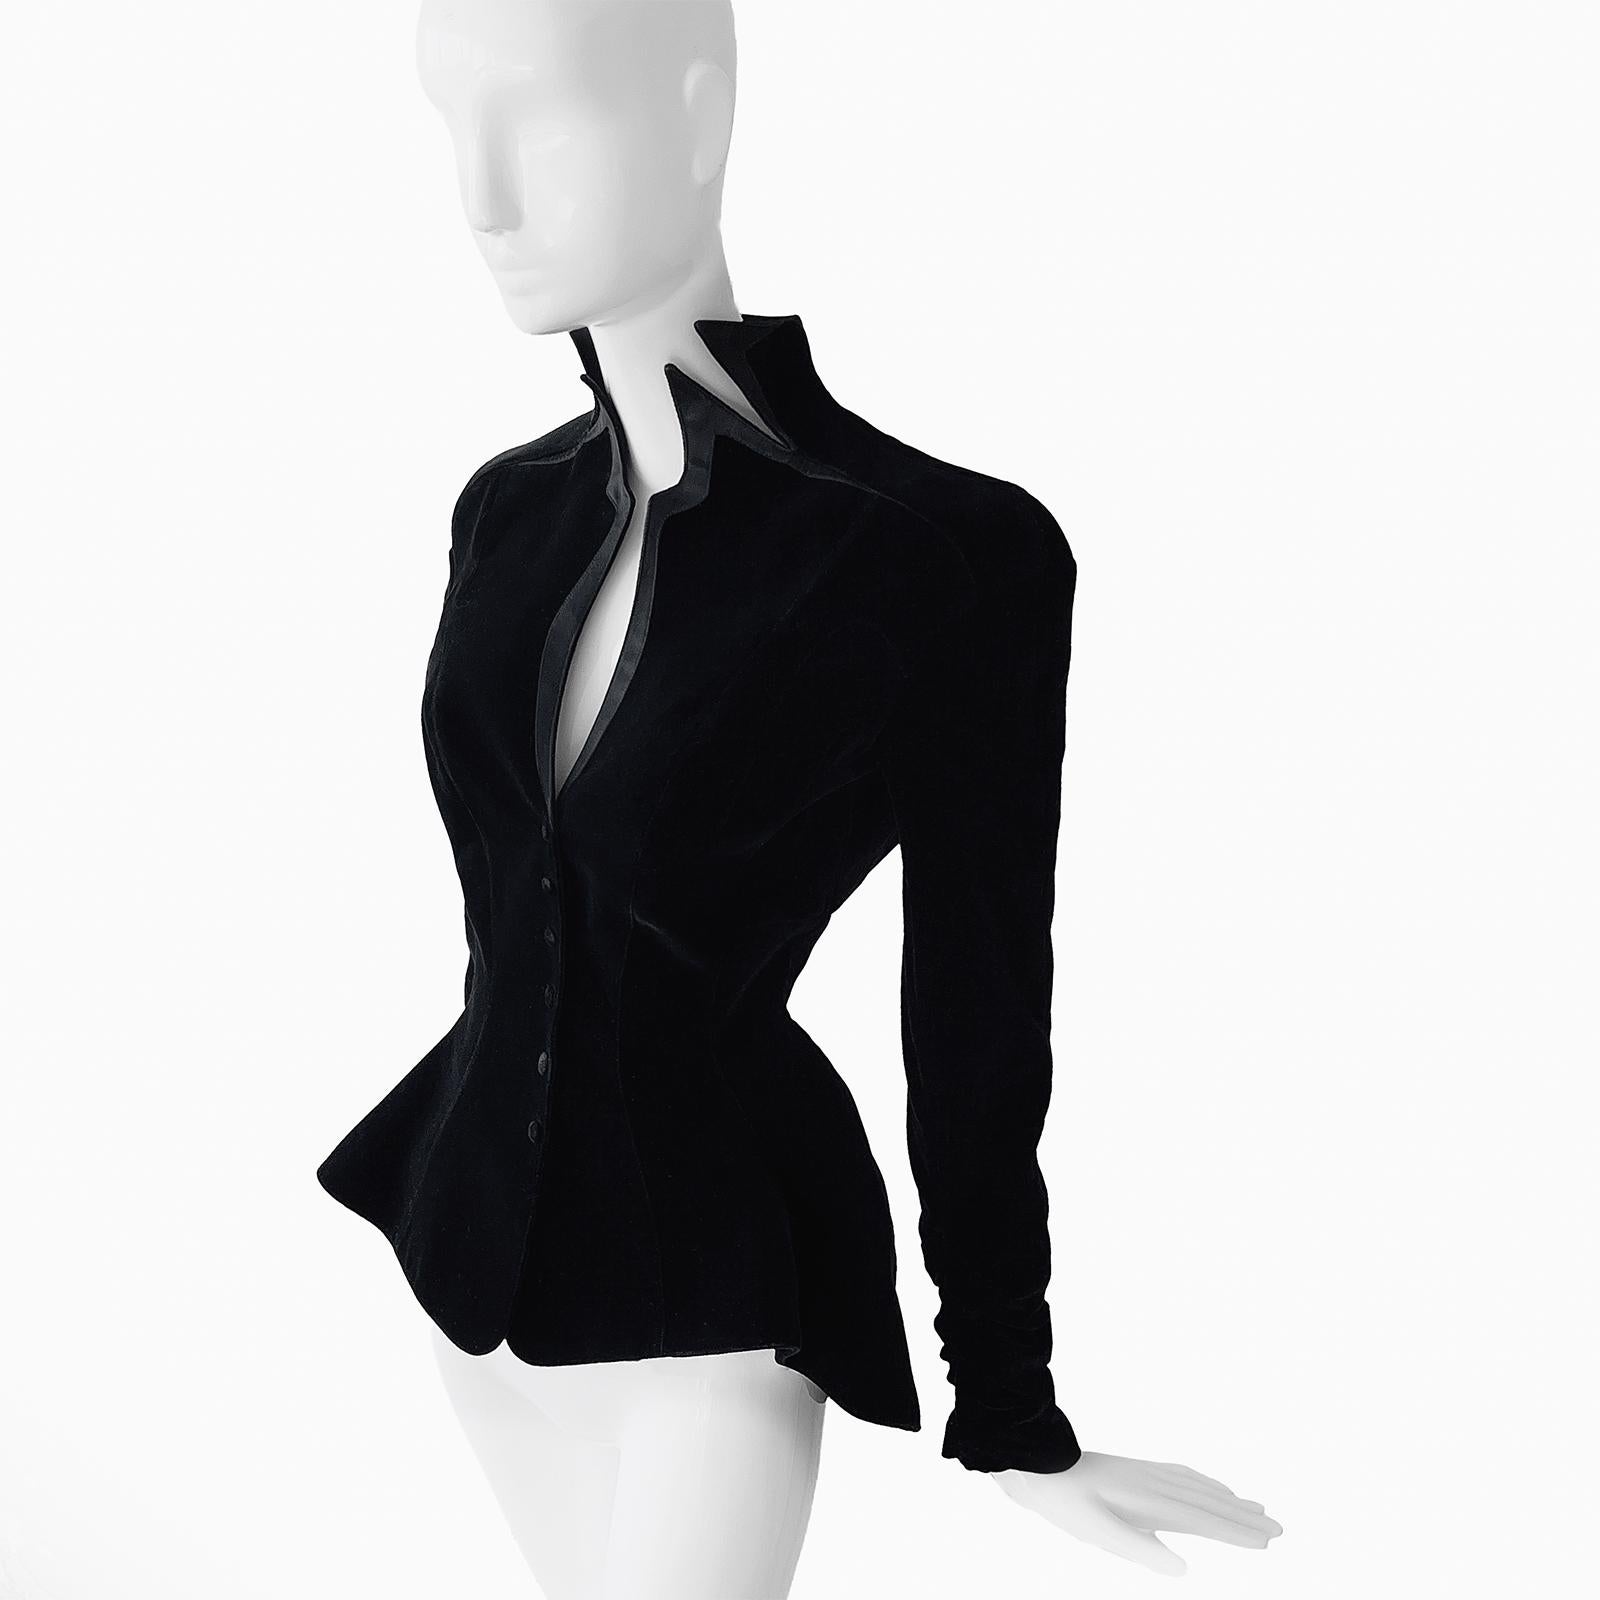 Thierry Mugler FW 1995 Dramatic Runway Silk Jacket Black Velvet In Good Condition For Sale In Berlin, BE